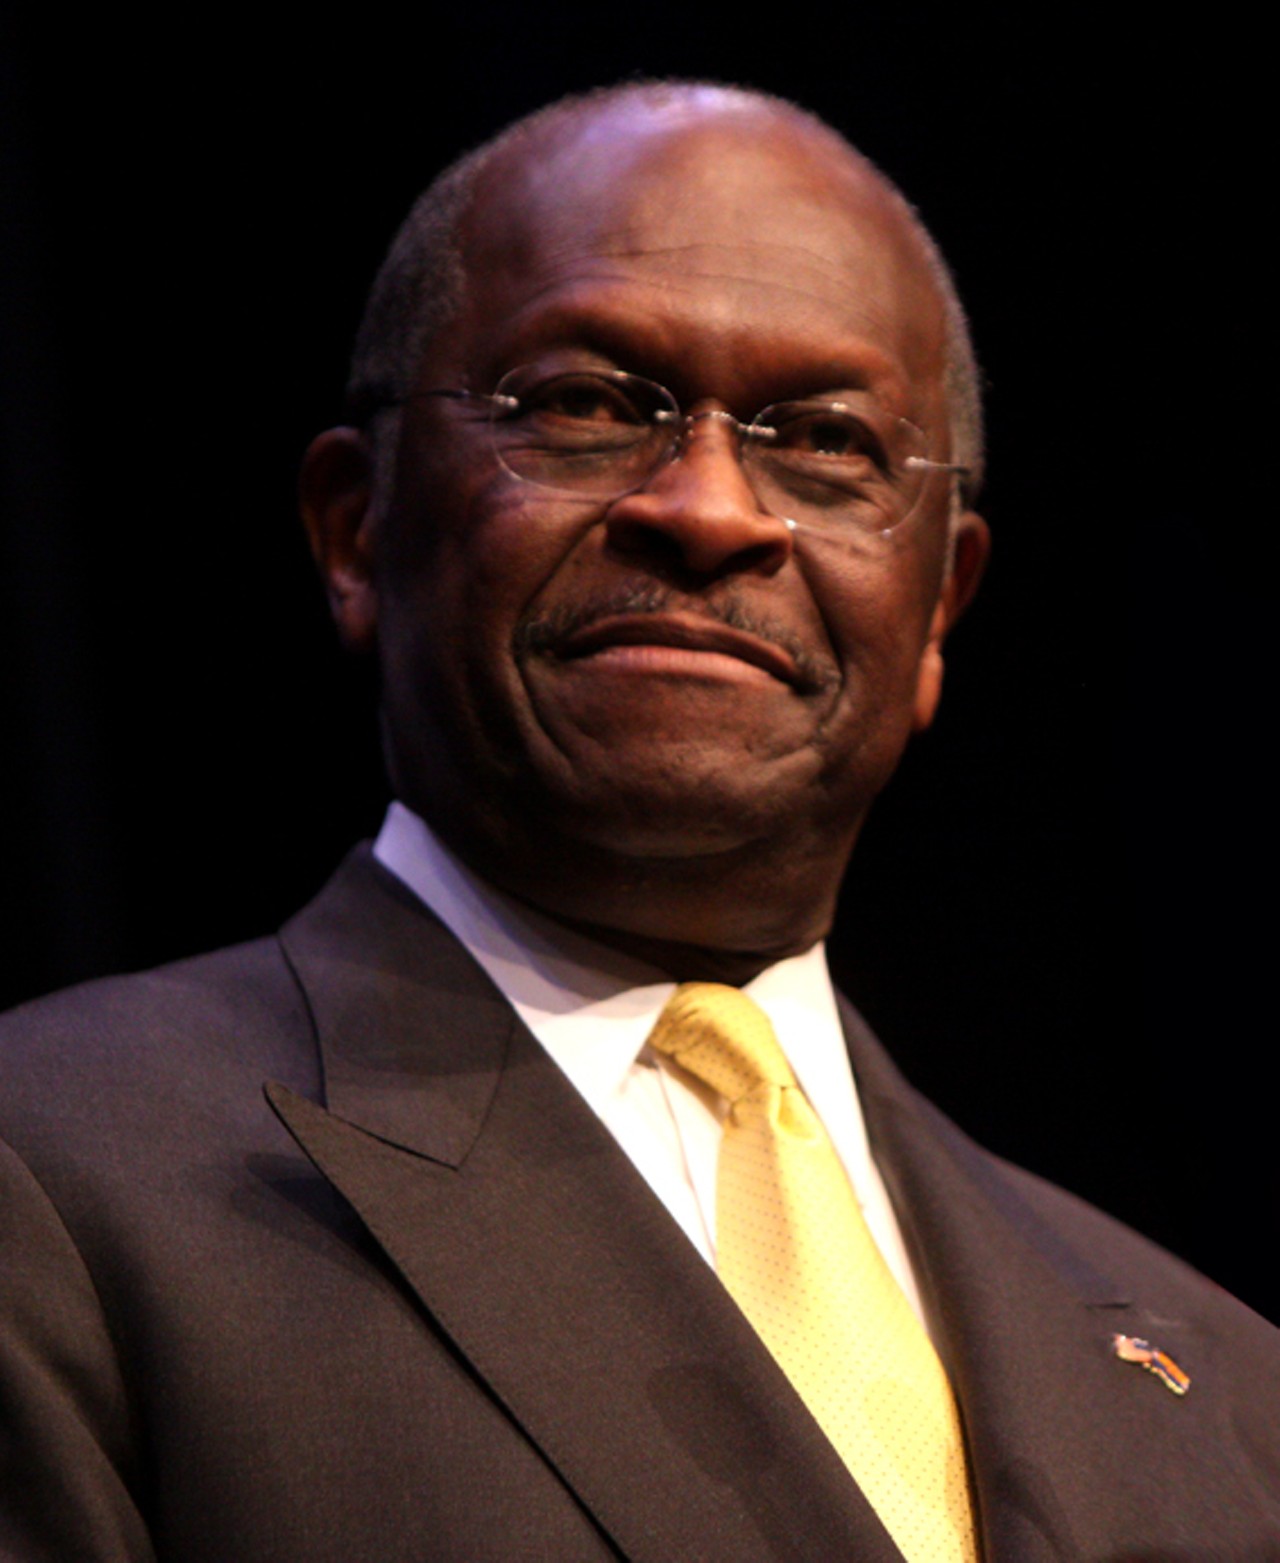 Hermain Cain
Did he really think chanting "9-9-9" would solve all of America's problems? Why did he keep quoting the Pokemon movie? Why was Mark Block smoking in his infamous ad? Herman Cain's campaign raised a lot of questions before it was derailed by allegations of sexual promiscuity, but he was undoubtedly one of the more entertaining and original figures of 2012. Please come back in 2016, Herman, we miss you.